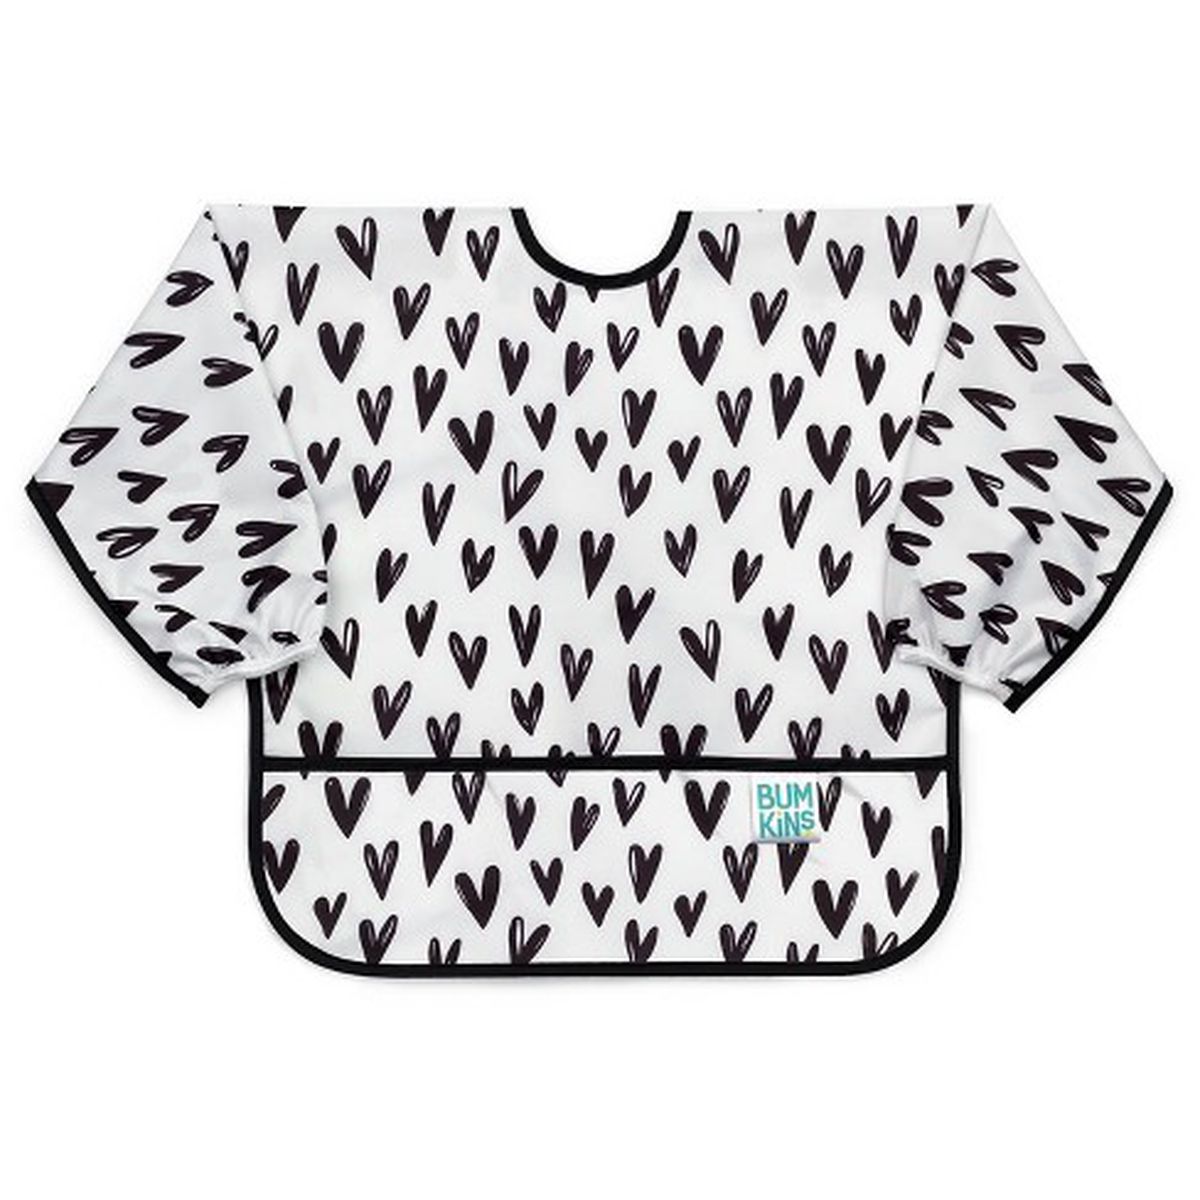 A child’s bib shirt with a pattern of black hearts